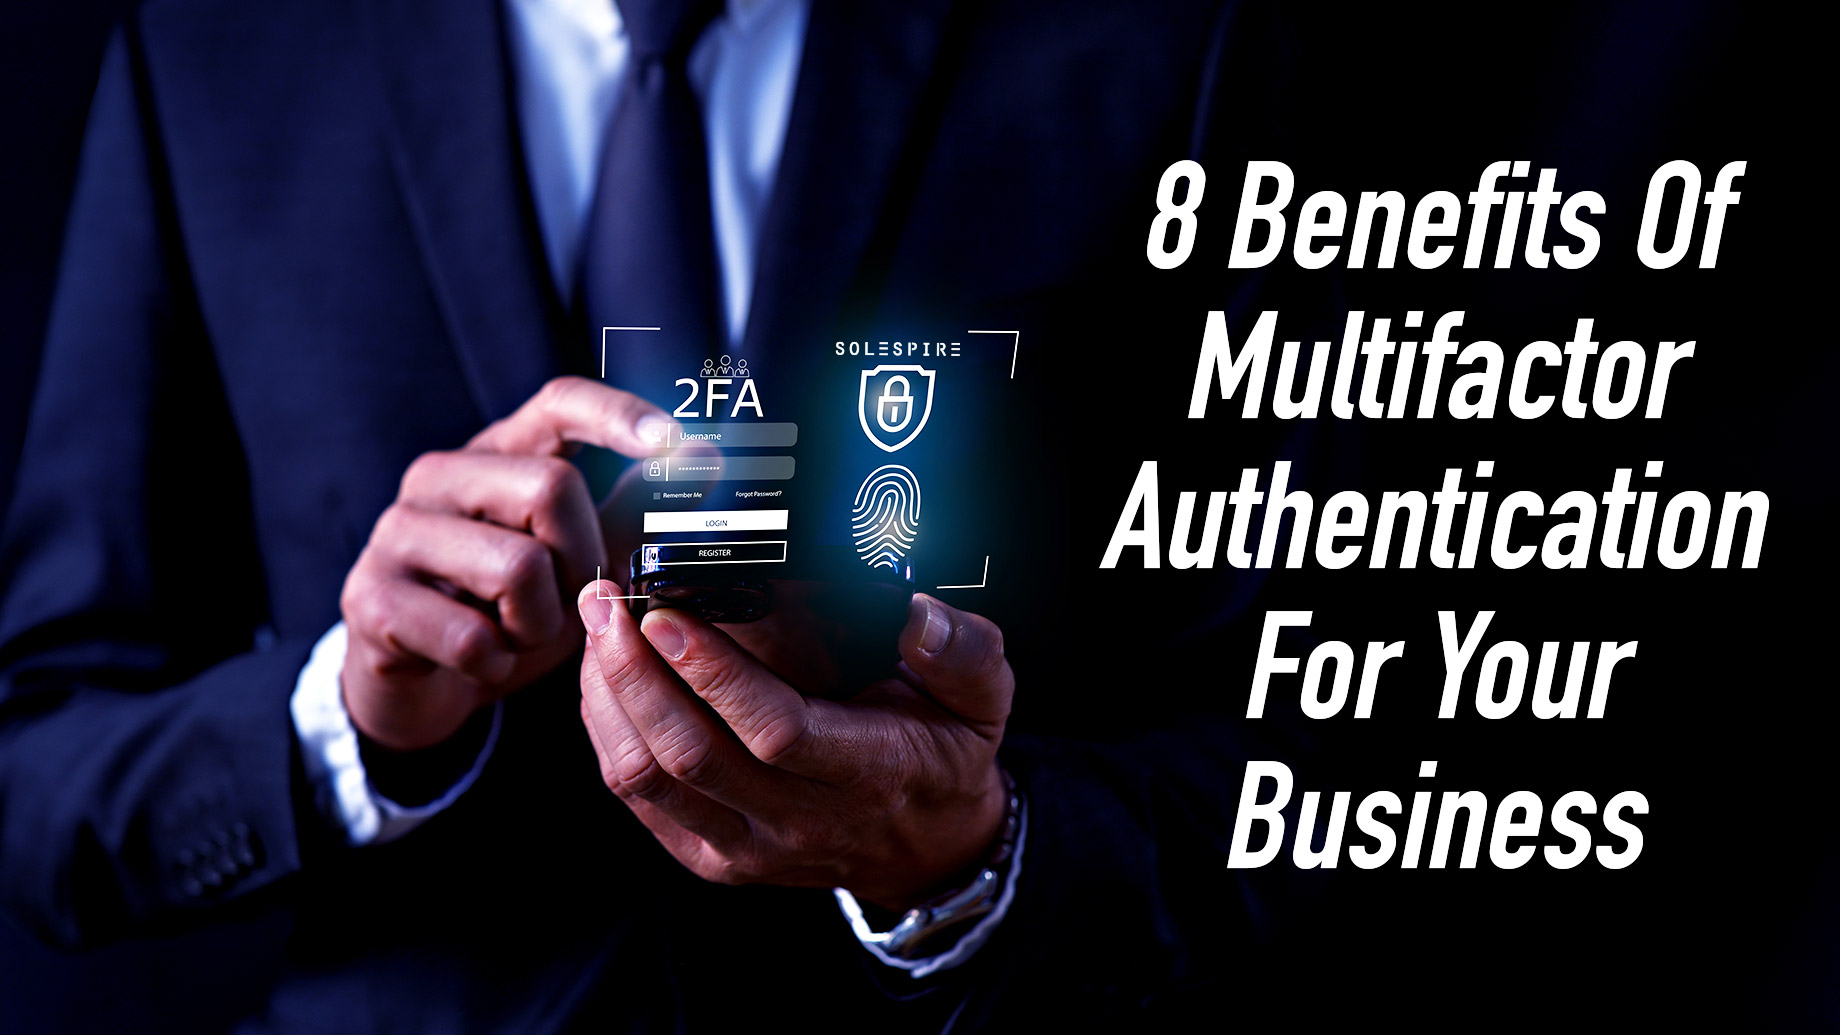 8 Benefits Of Multifactor Authentication For Your Business